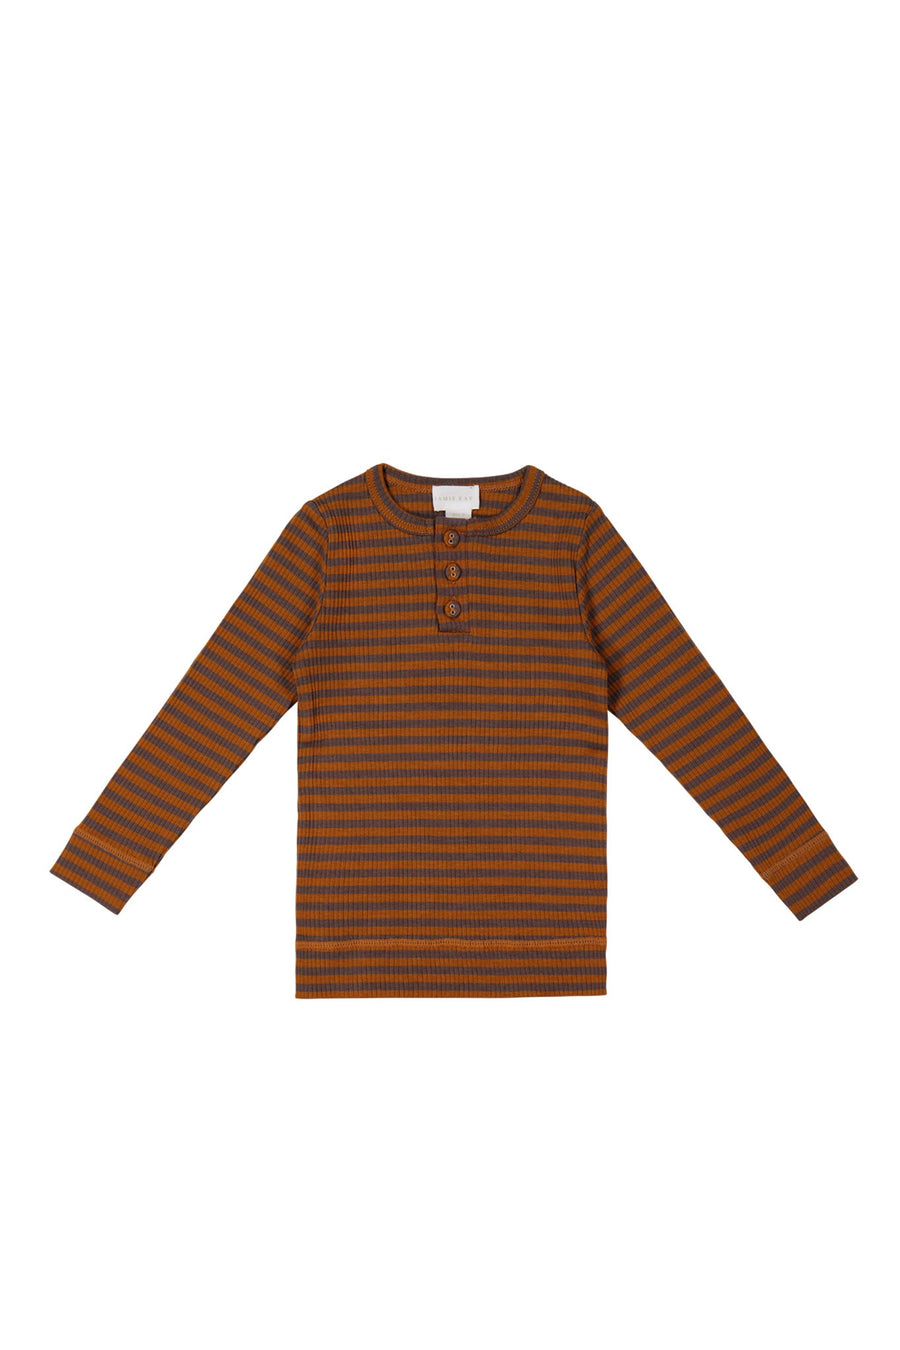 Organic Cotton Modal Long Sleeve Henley - Narrow Stripe Ginger Childrens Top from Jamie Kay NZ